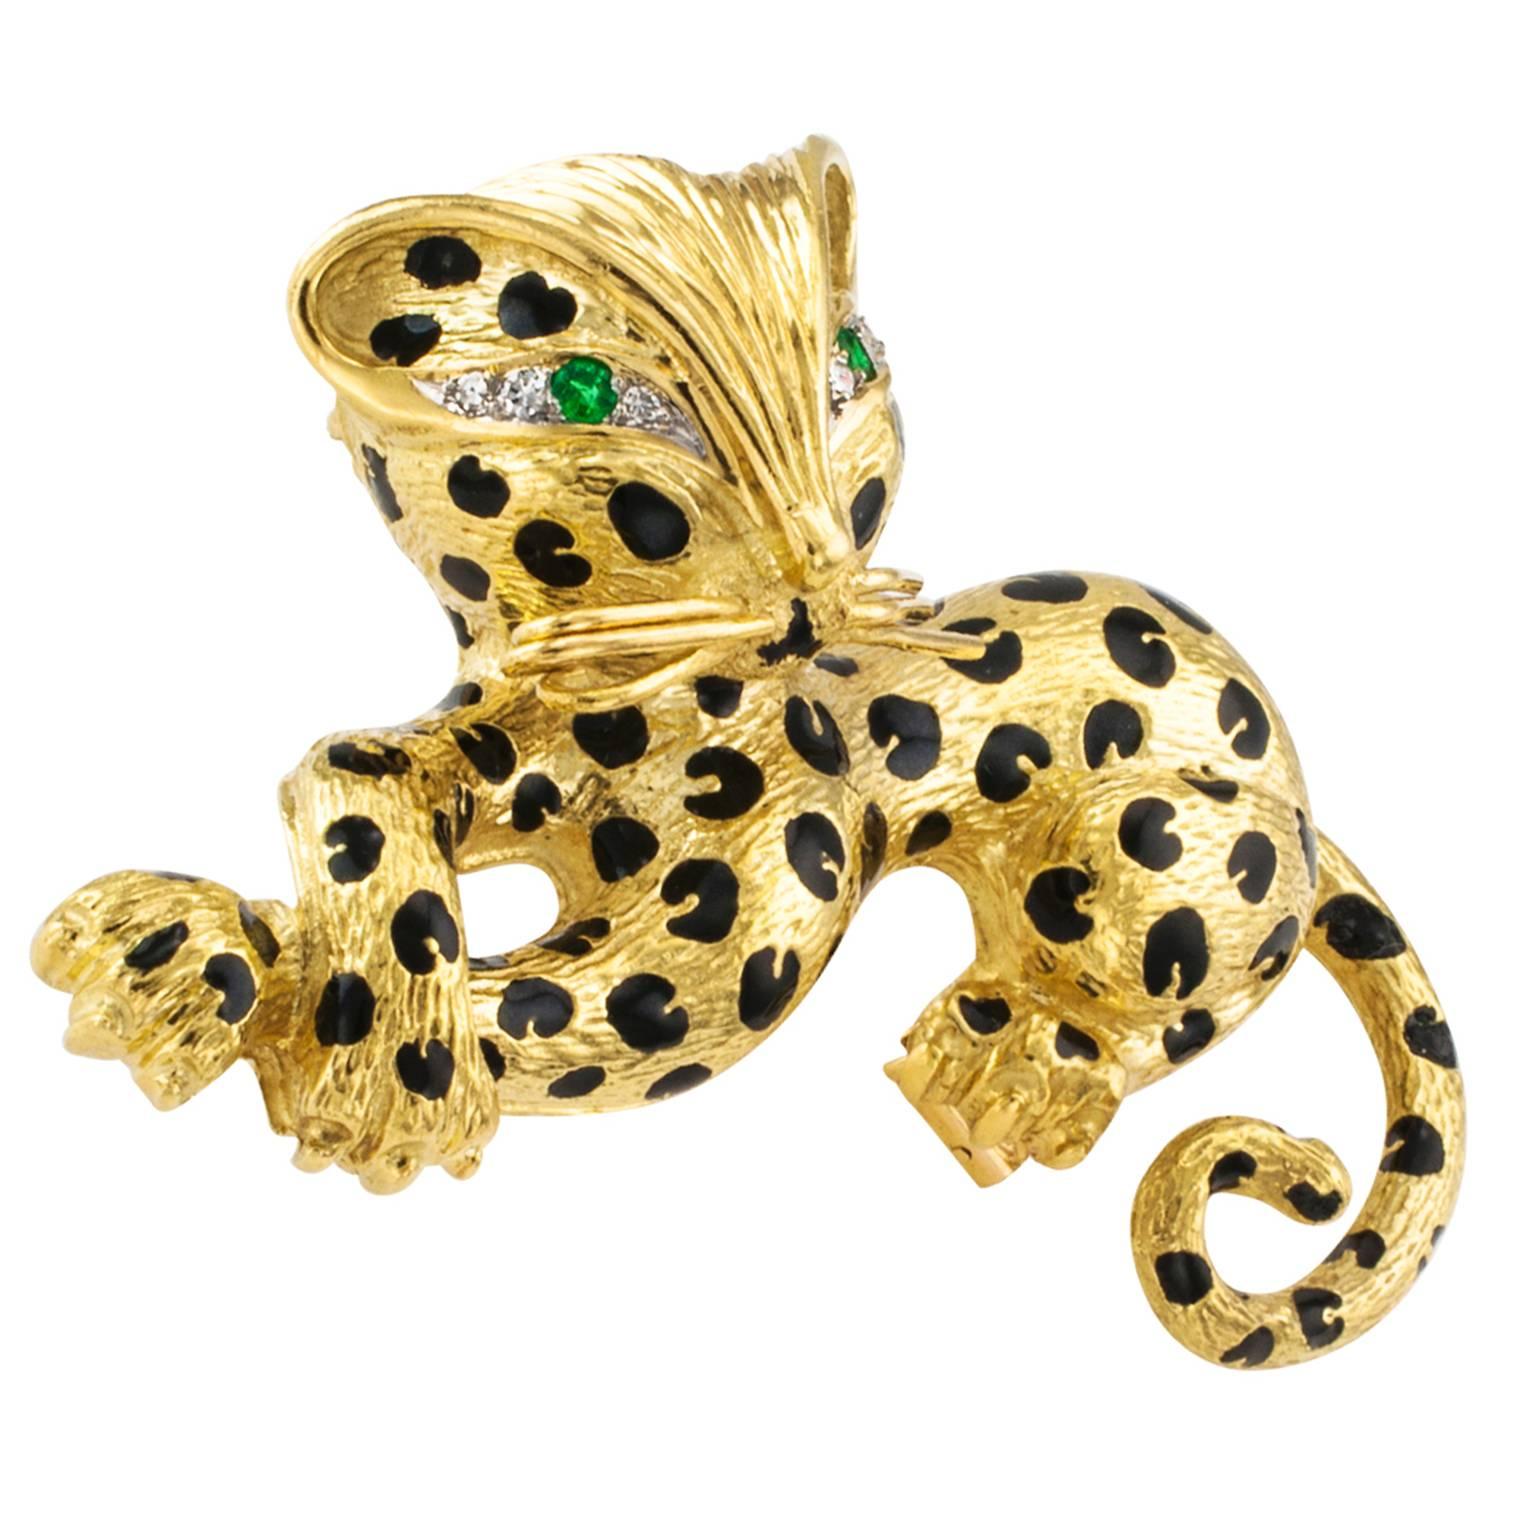 Fred Paris Estate Whimsical Leopard Brooch

What a personality...  and those captivating eyes that sparkle ever so brightly.  Suave. Tres jolie!  En suite with a pair of coordinated ear clips, reference E2291.  In 18 karat gold, the eyes are set